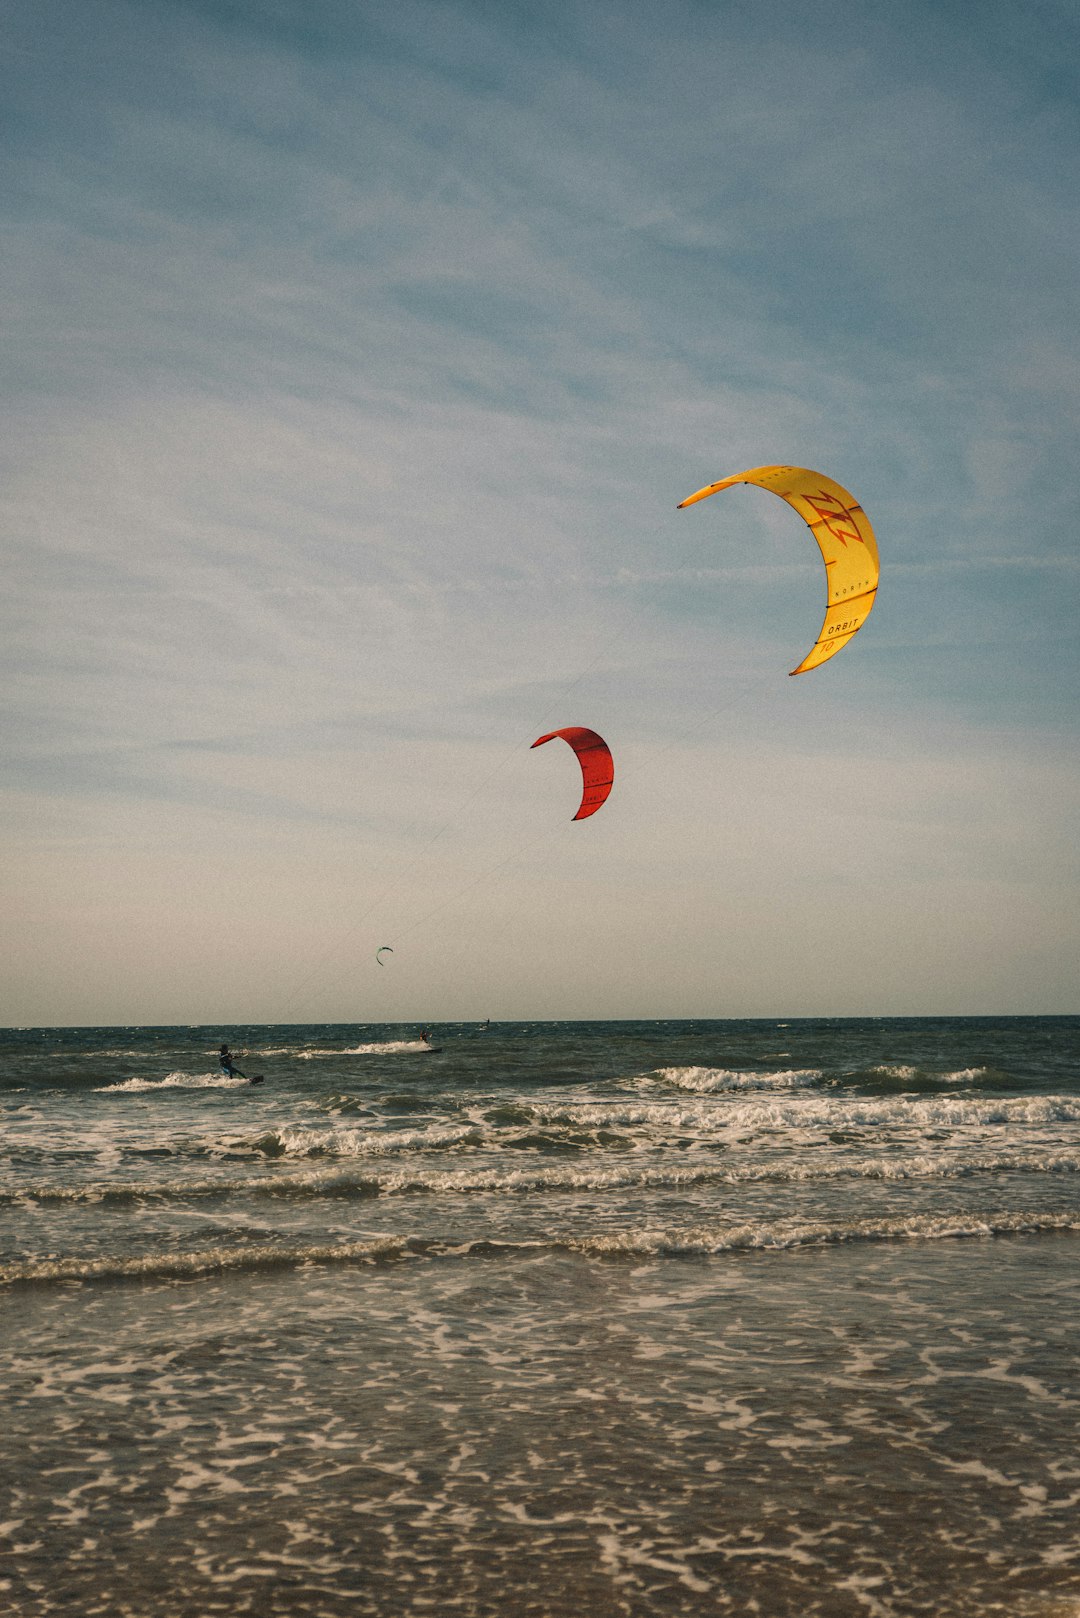 person in yellow parachute over sea during daytime